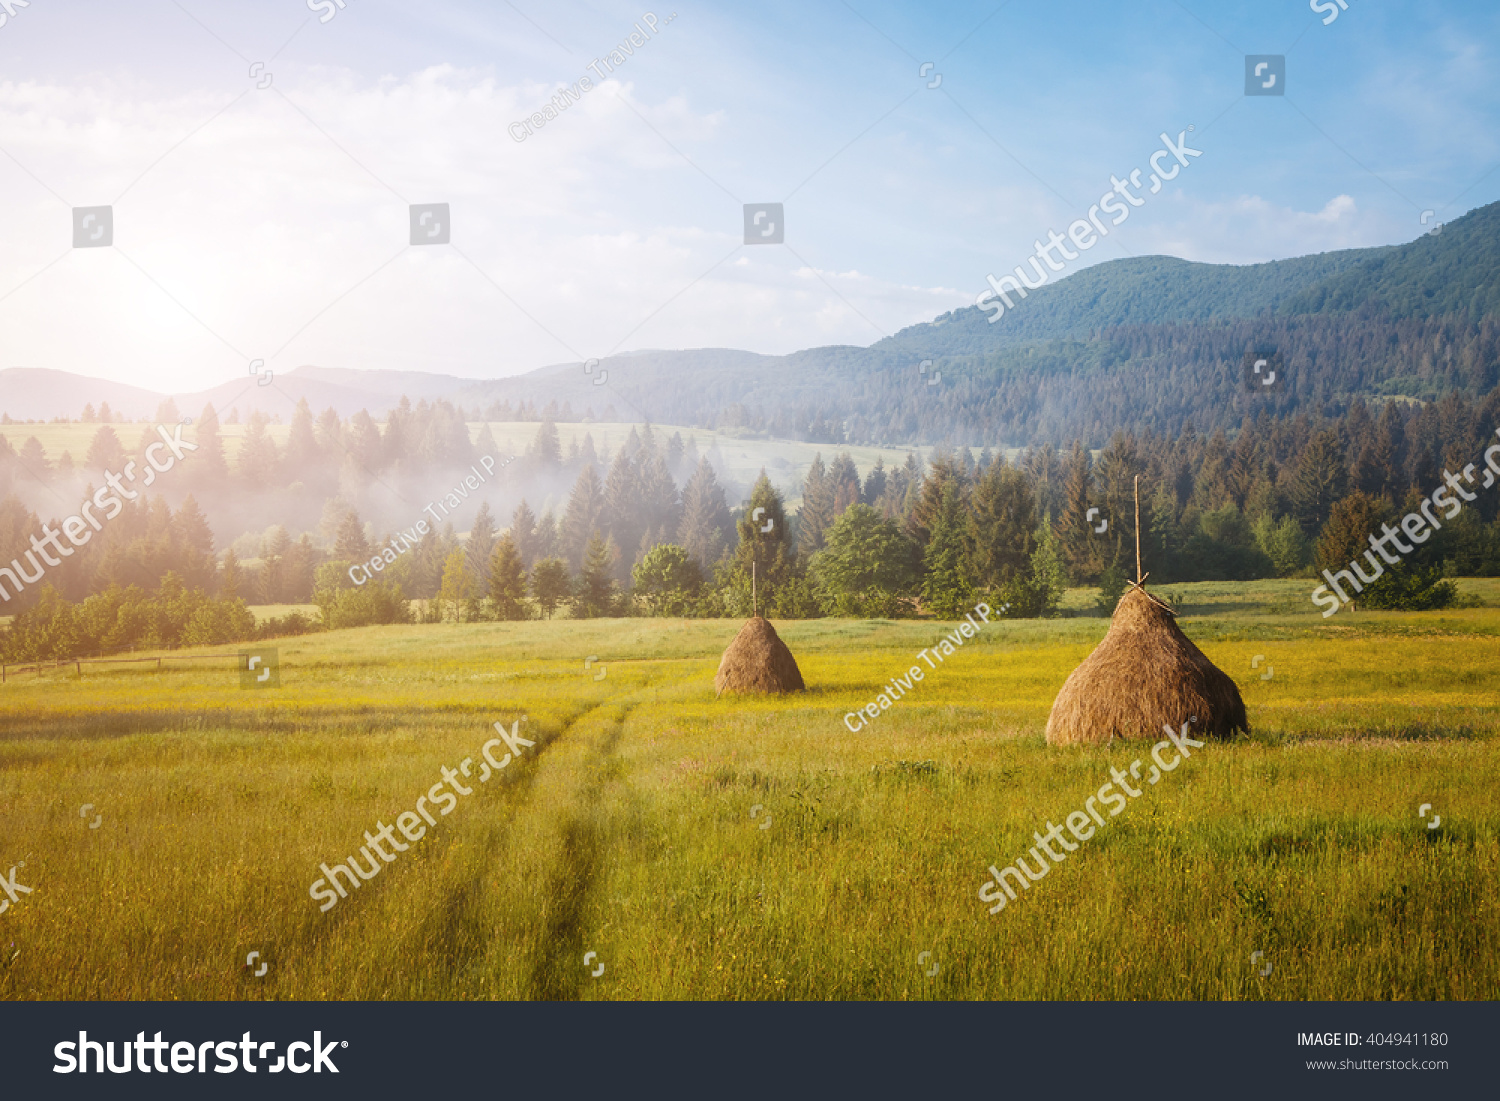 Fantastic day with fresh blooming hills in warm sunlight. Dramatic and picturesque morning scene. Location place: Carpathian, Ukraine, Europe. Artistic picture. Beauty world. Soft filter effect. #404941180